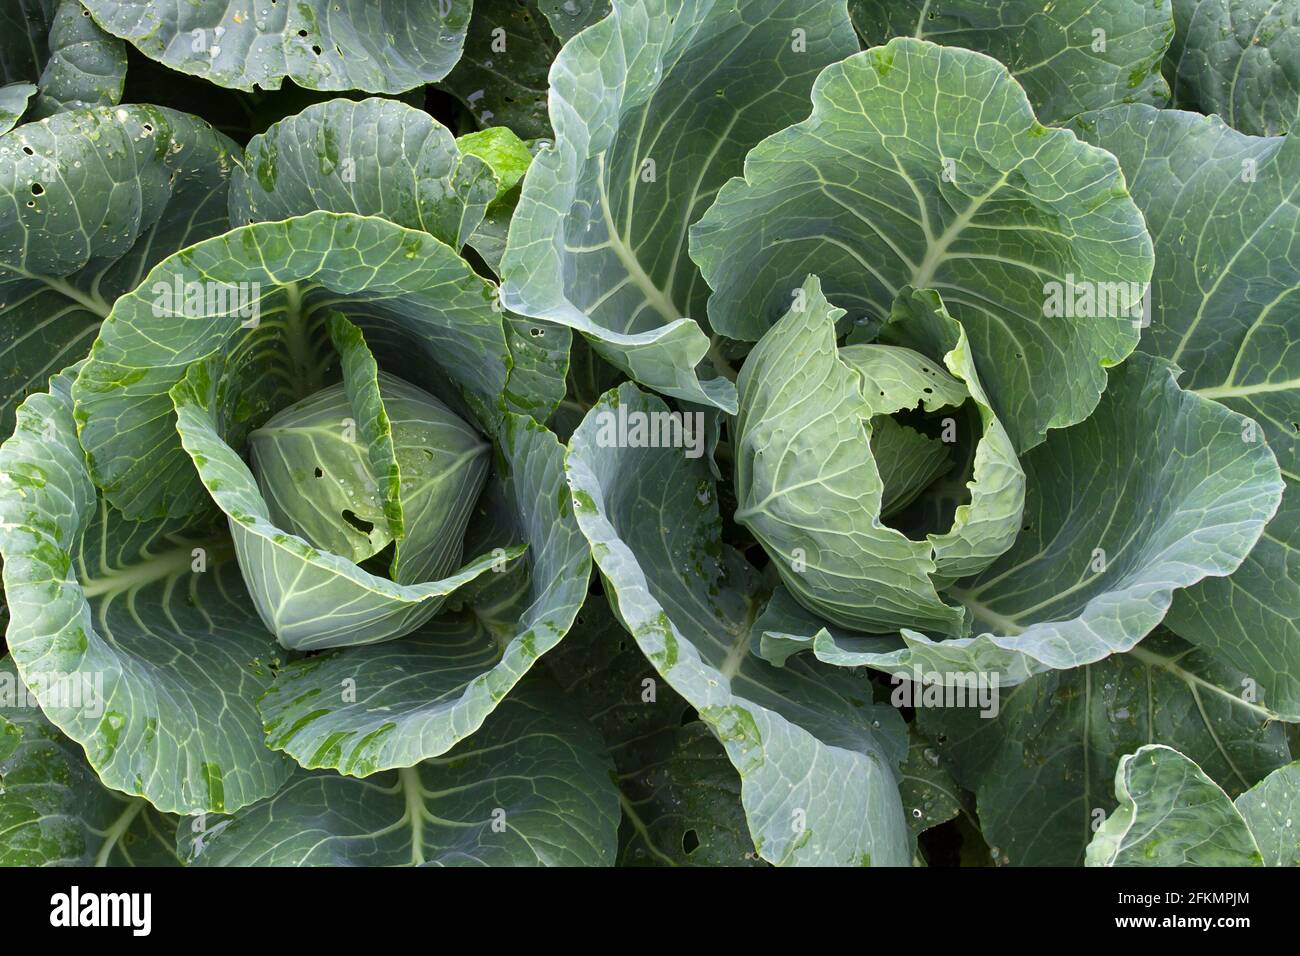 two immature cabbage heads in the vegetable garden, closeup Stock Photo